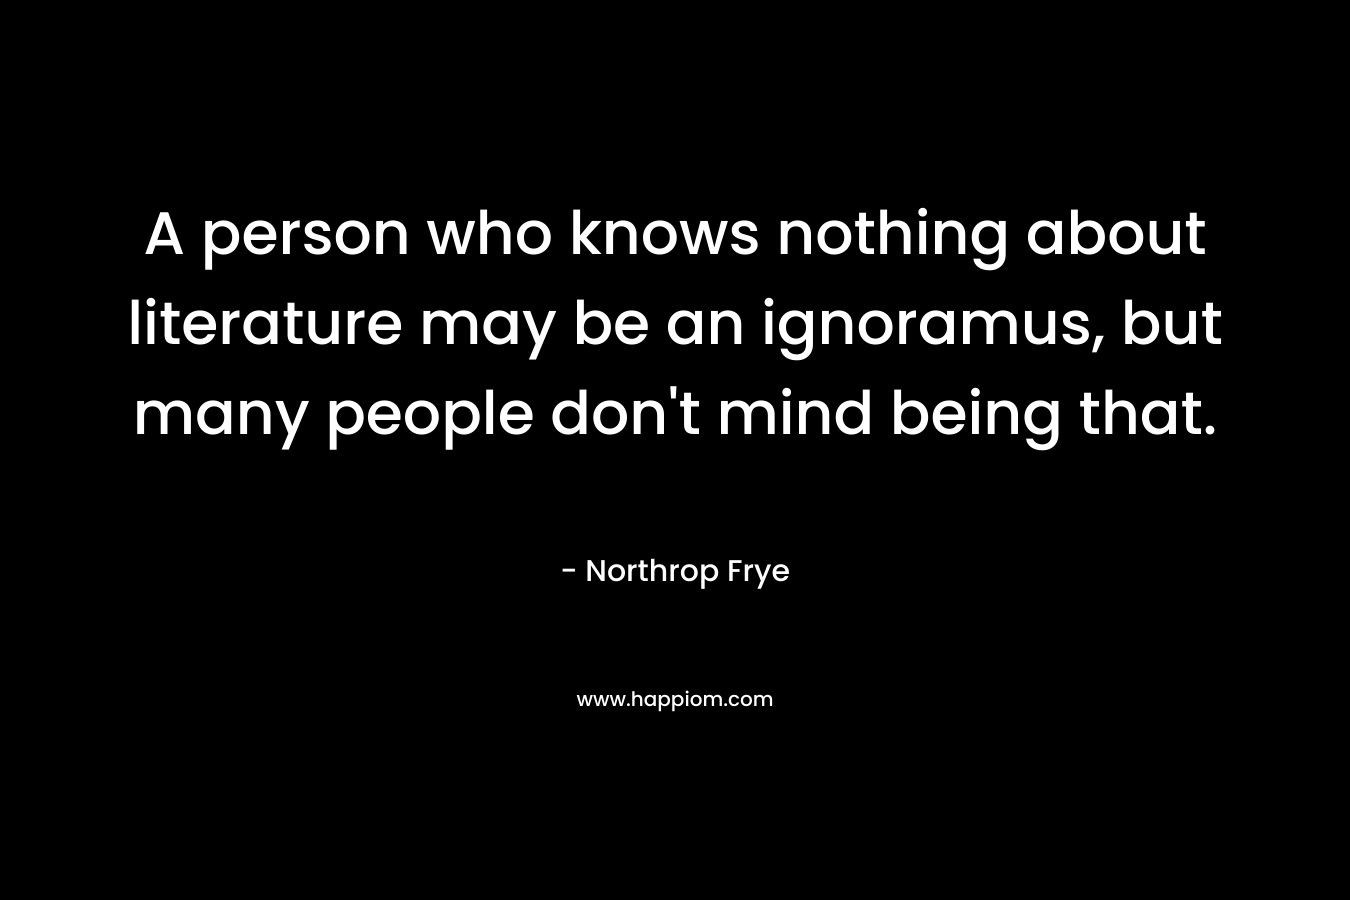 A person who knows nothing about literature may be an ignoramus, but many people don't mind being that.